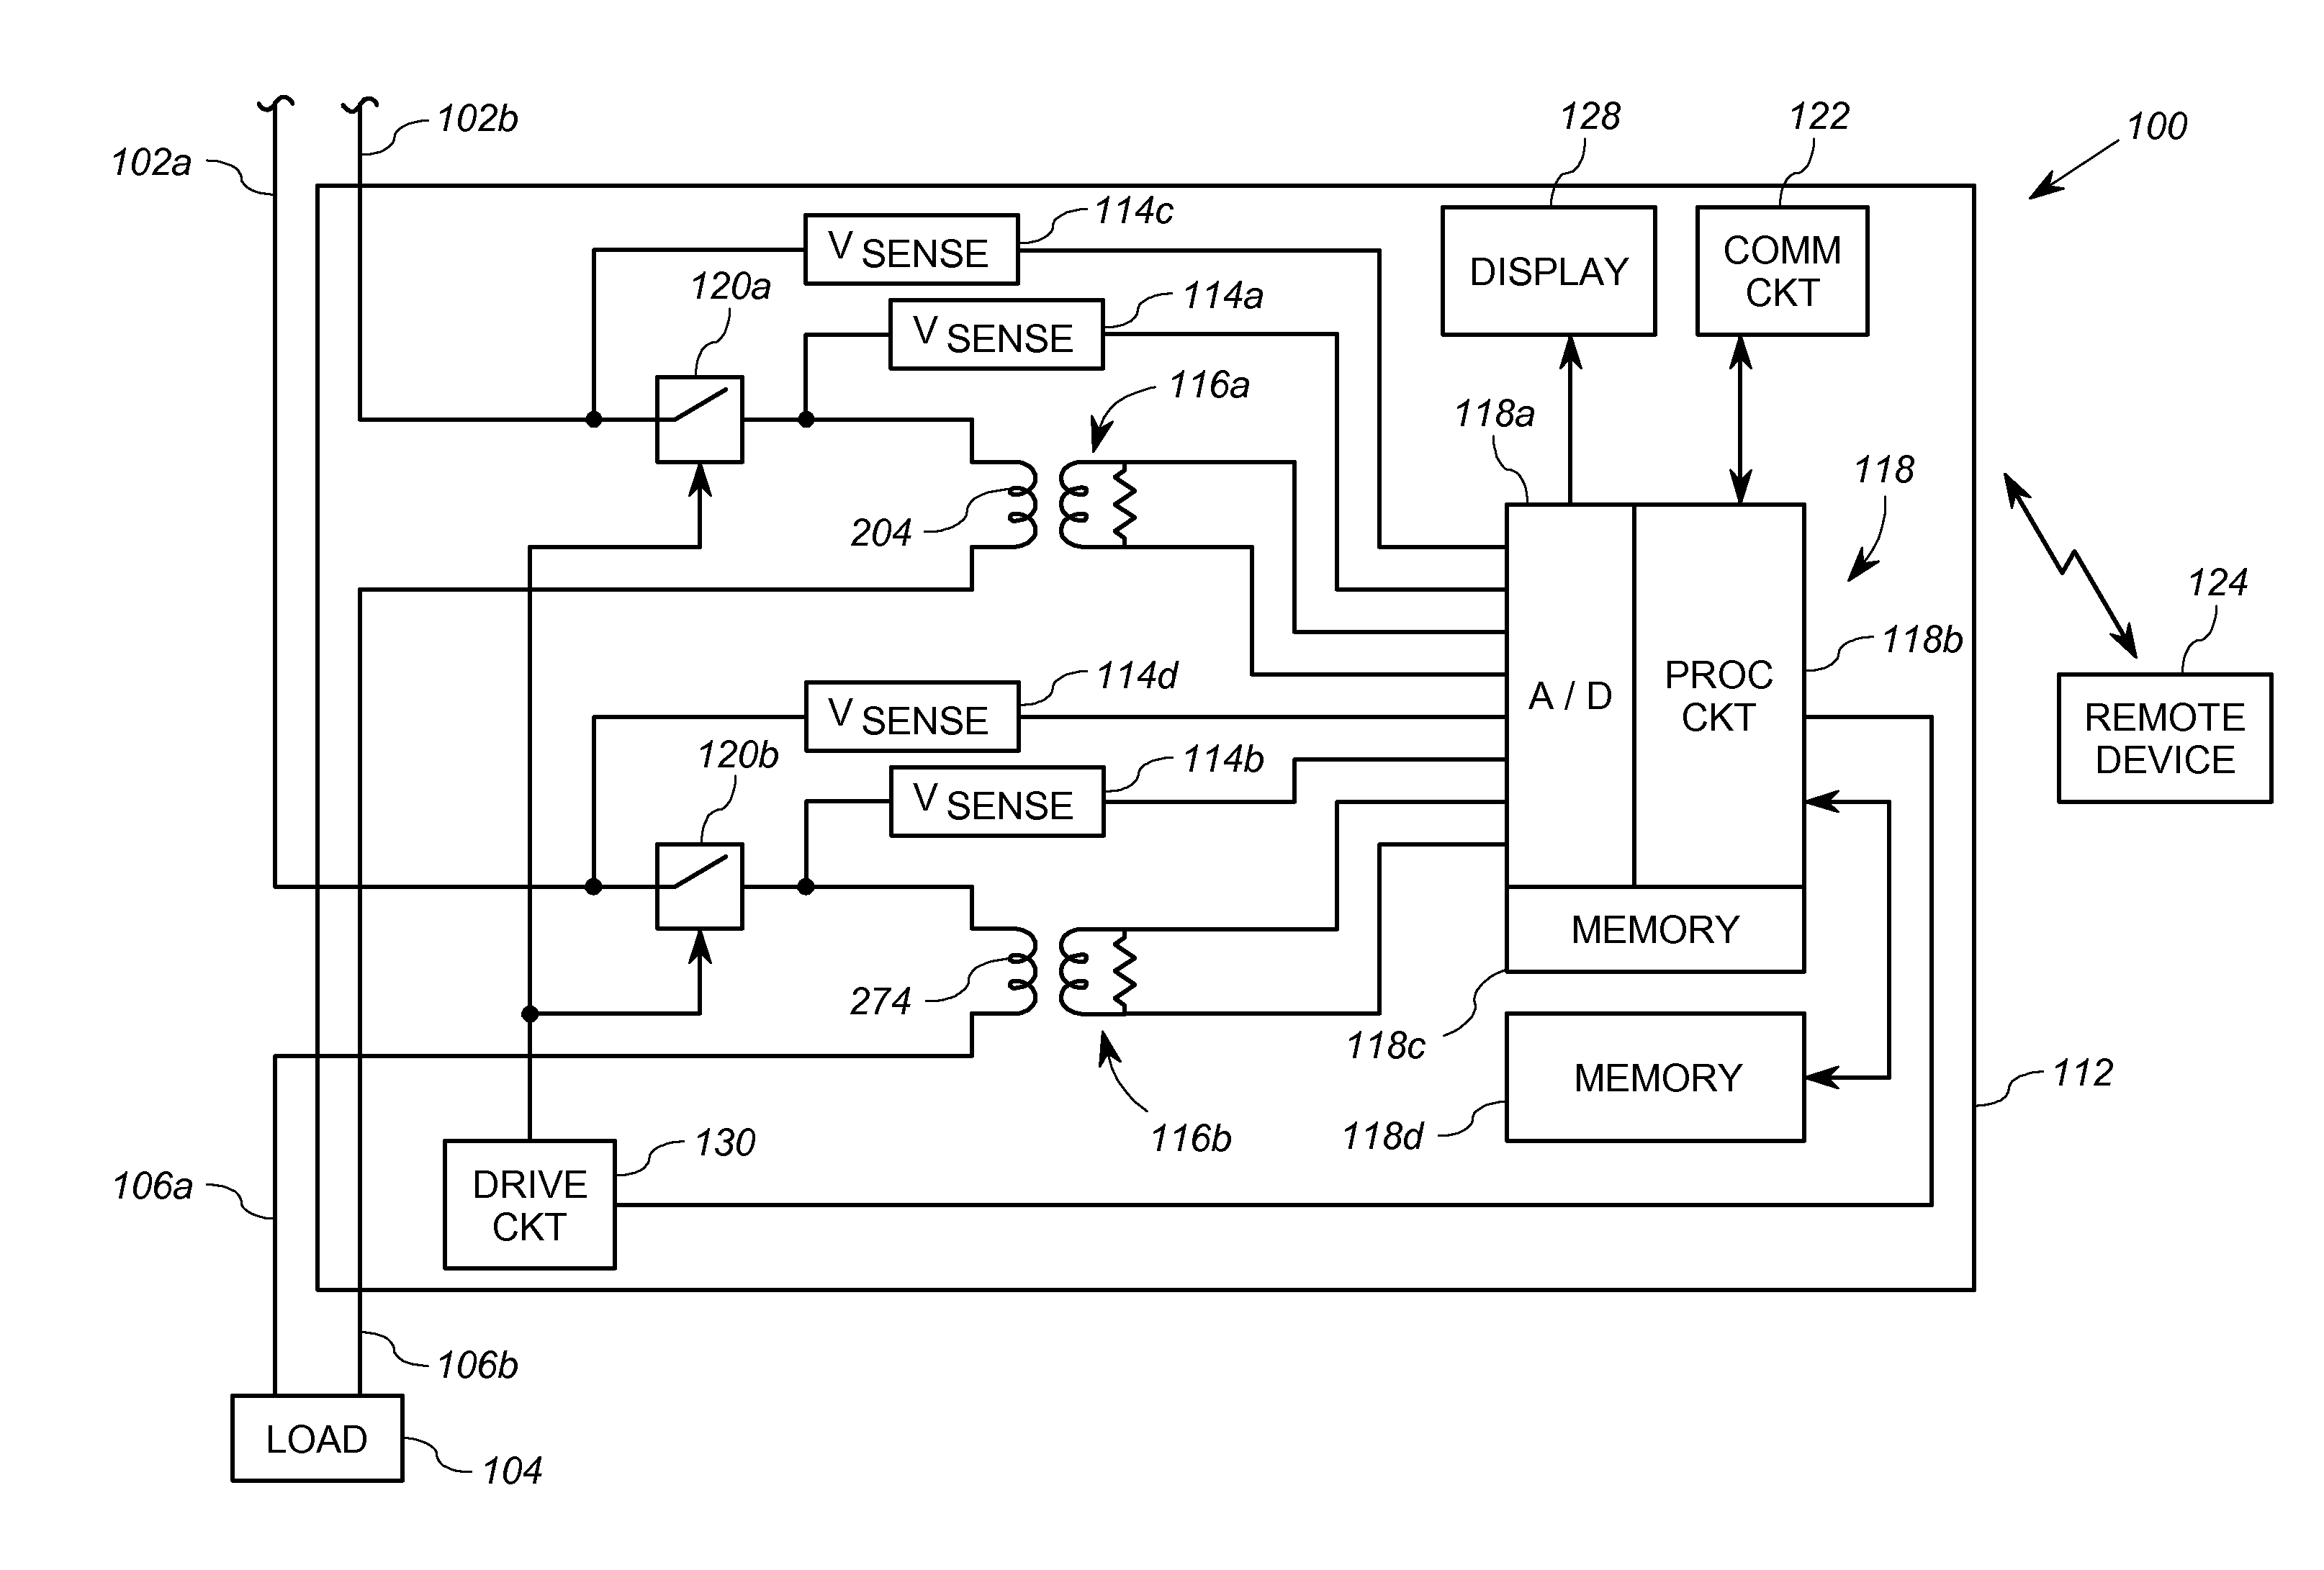 Element Resistance Measurement in an Electricity Meter